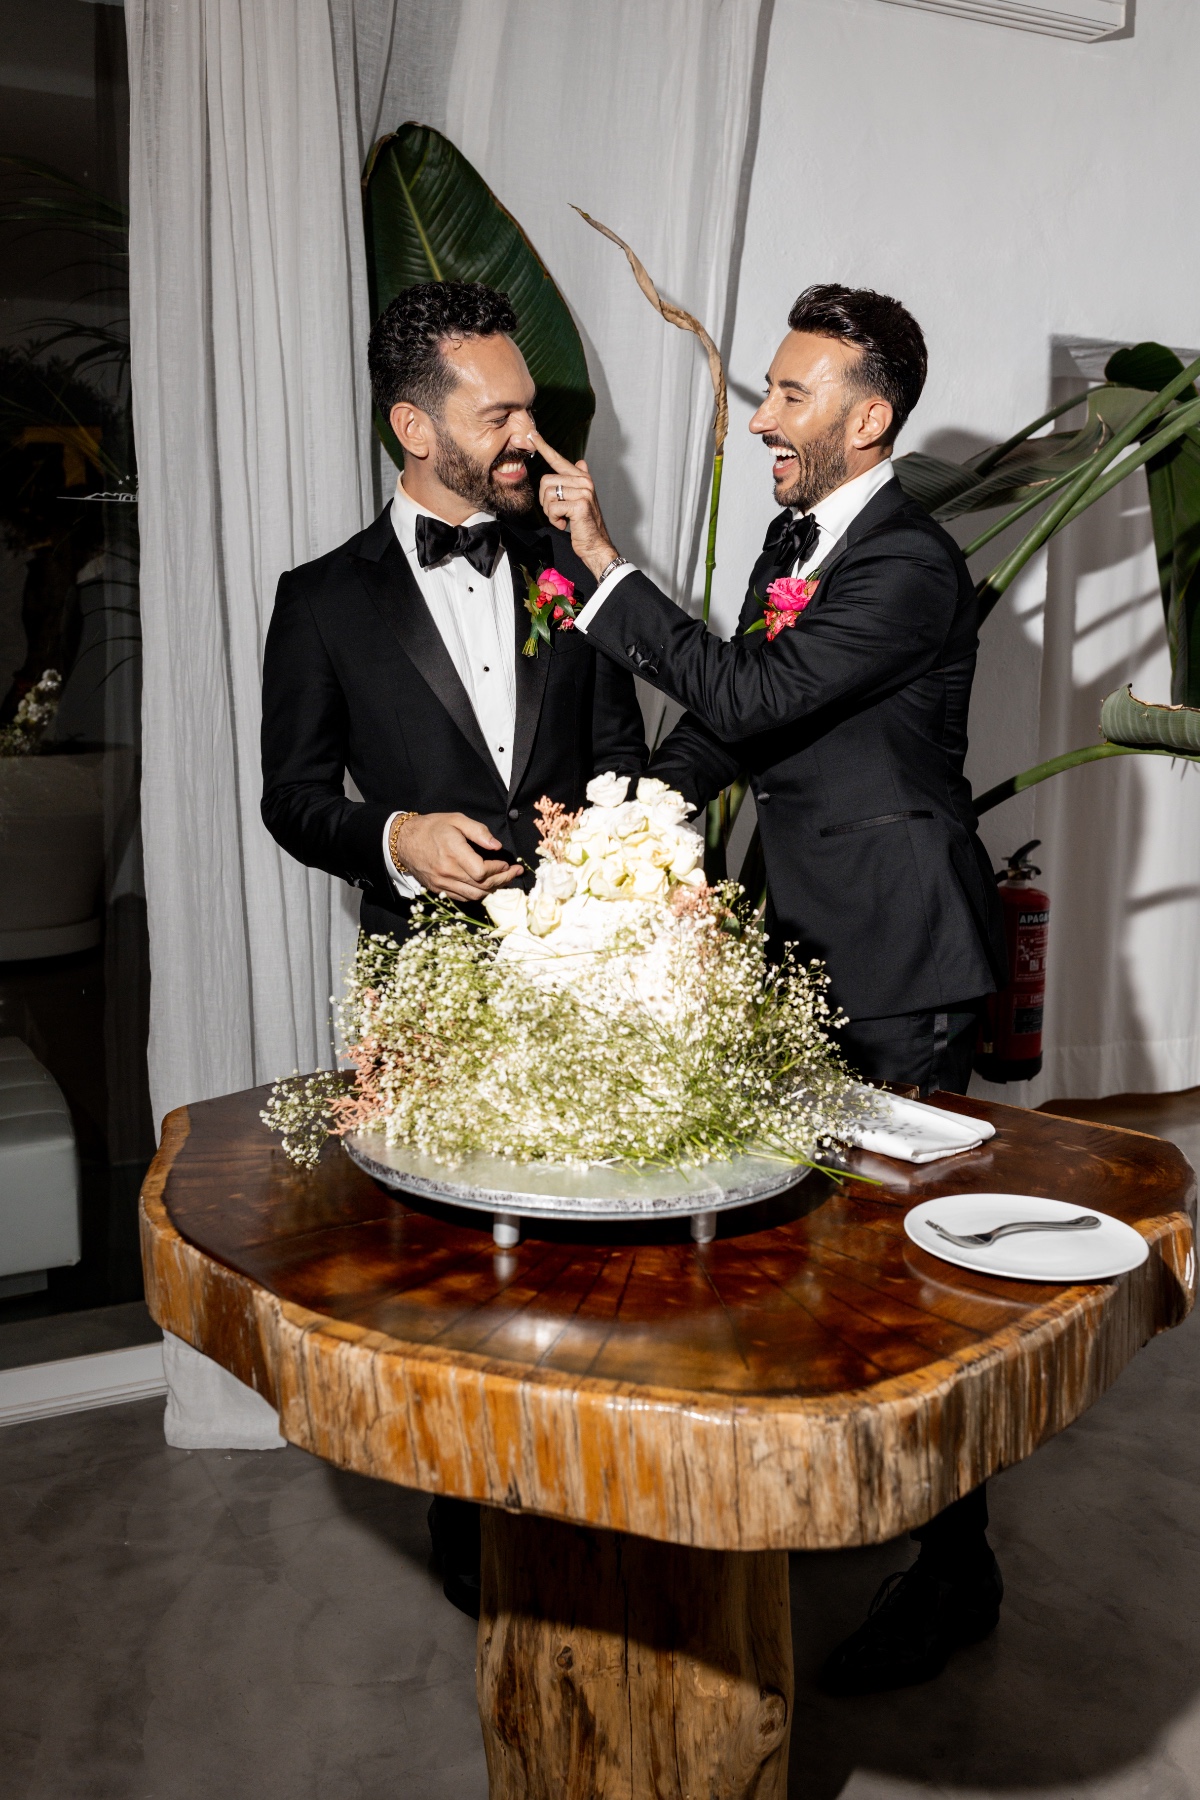 Playful grooms exchanging wedding cake frosting at floral table